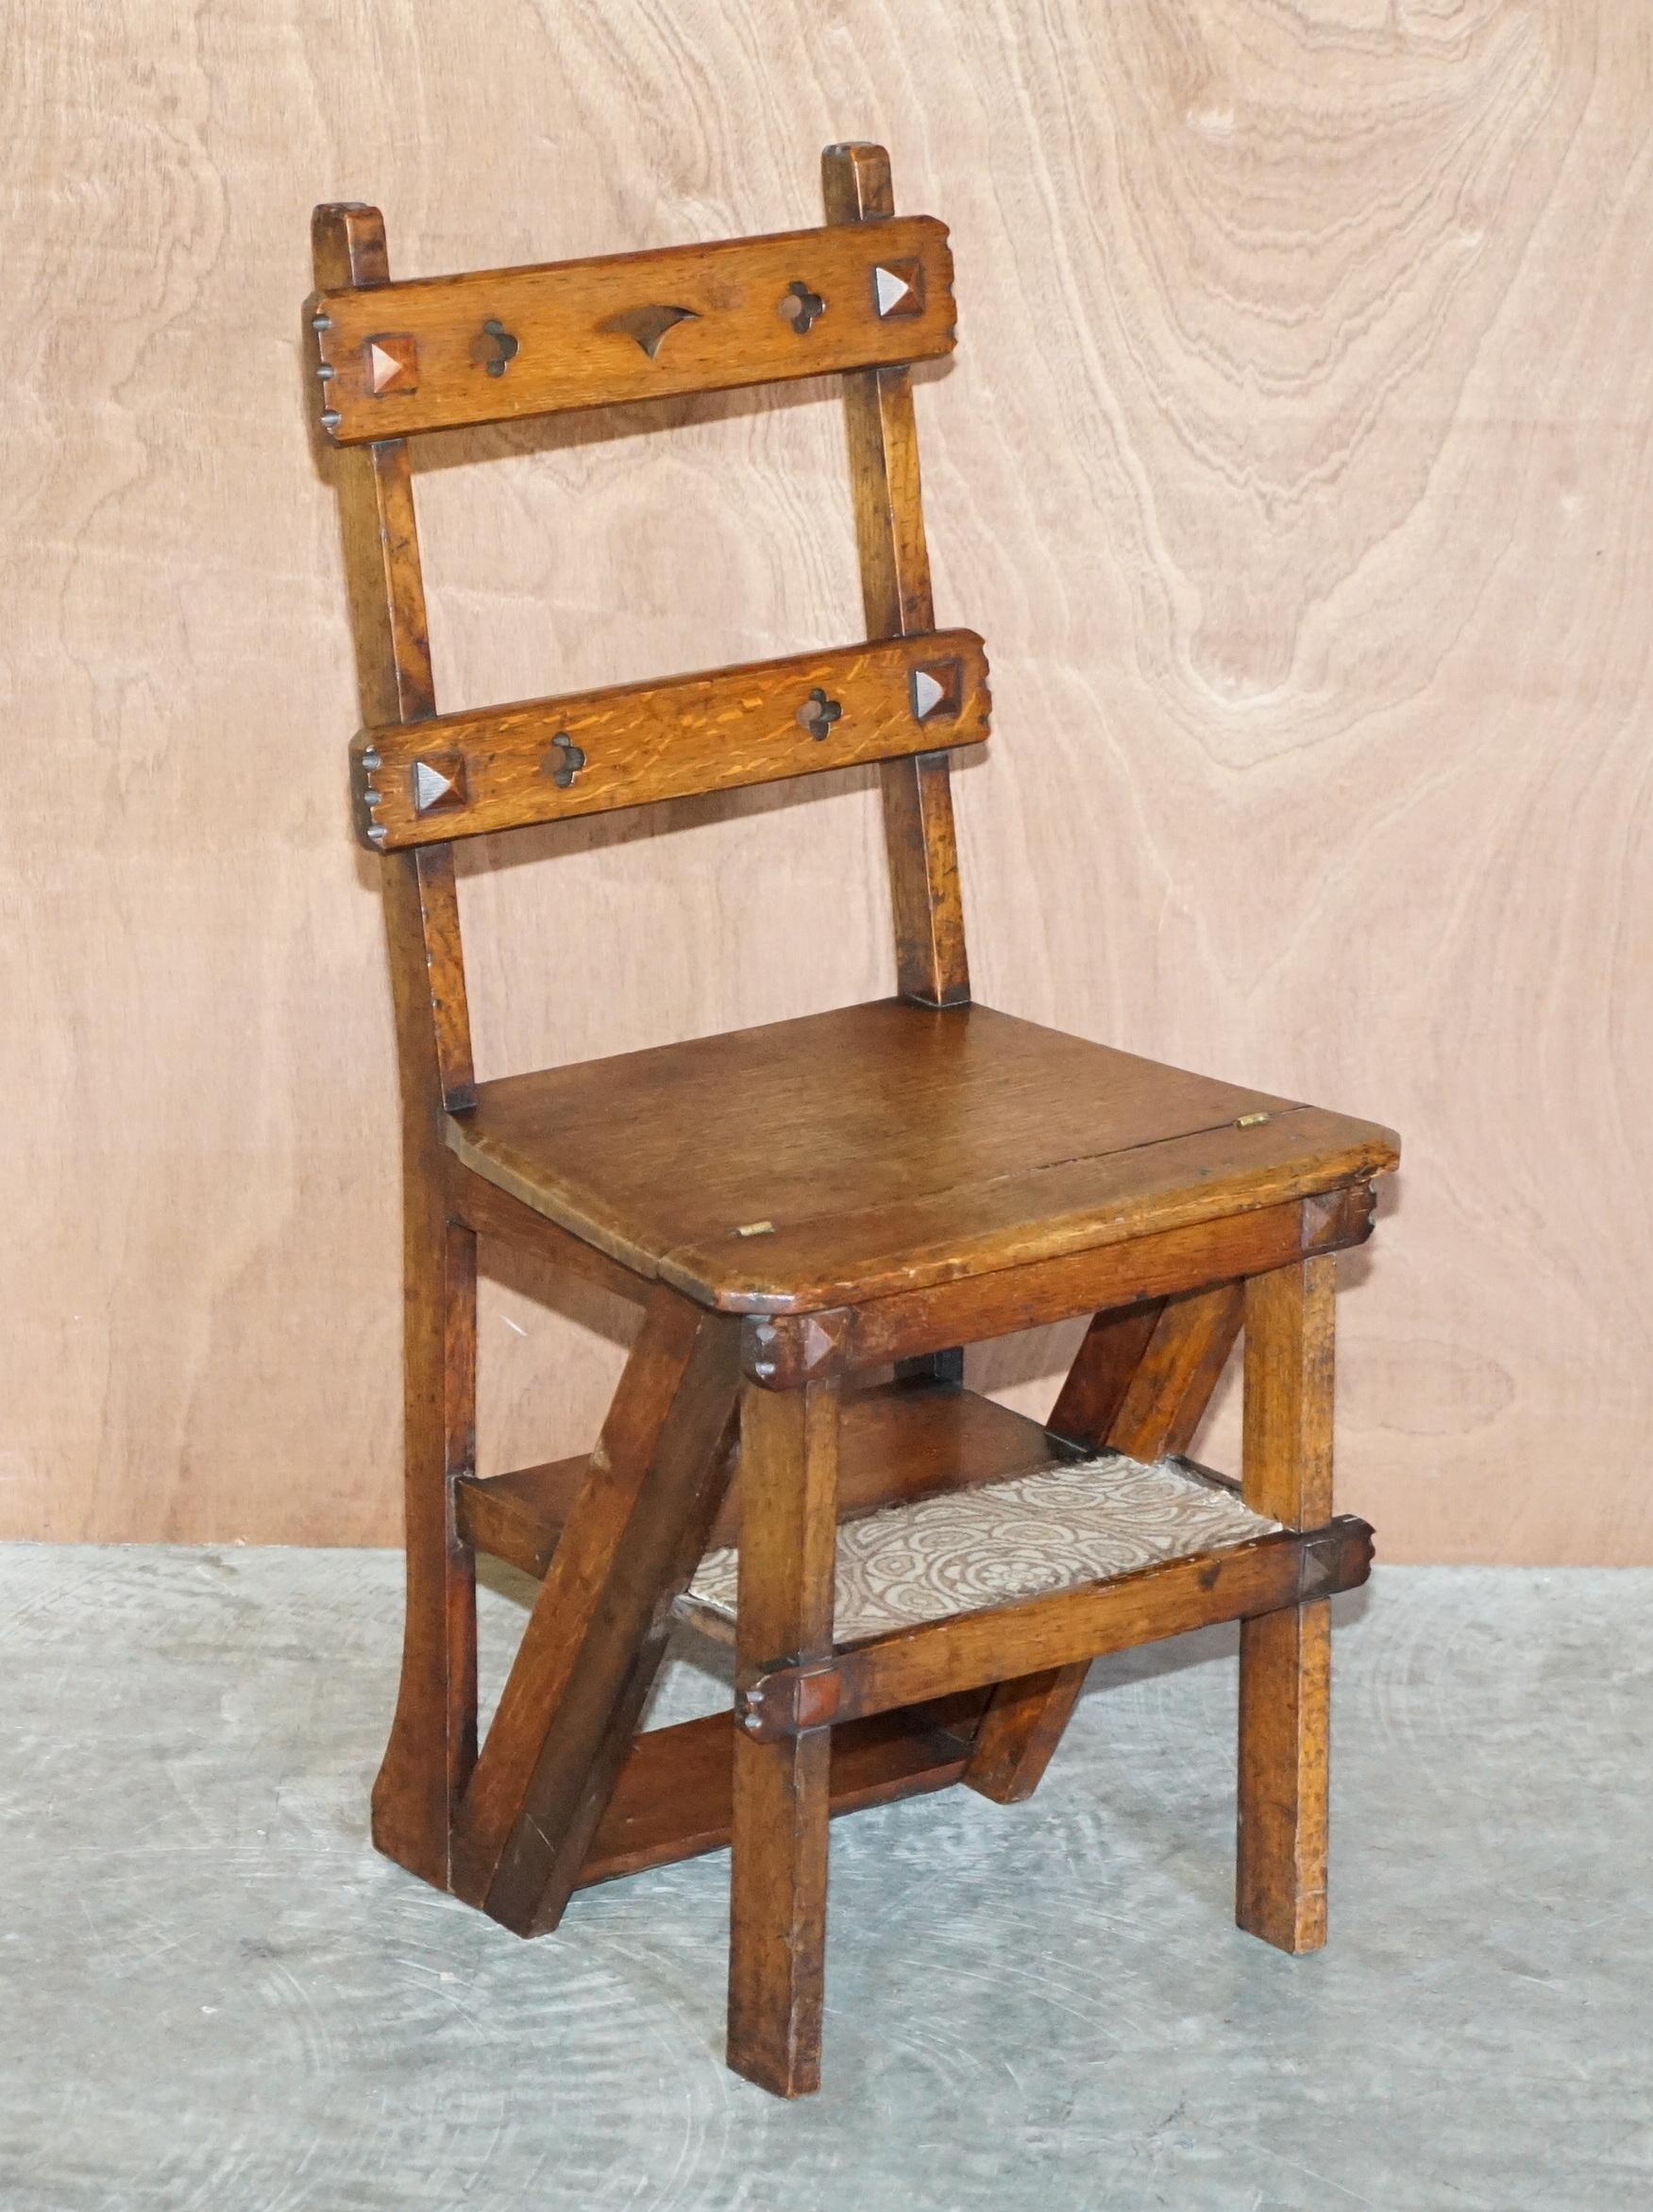 We are delighted to offer for sale this lovely antique Arts & Crafts Victorian metamorphic library steps chair in oak with William Morris Carpet steps 

A very charming and highly collectable piece, designed as an at home library steps and reading